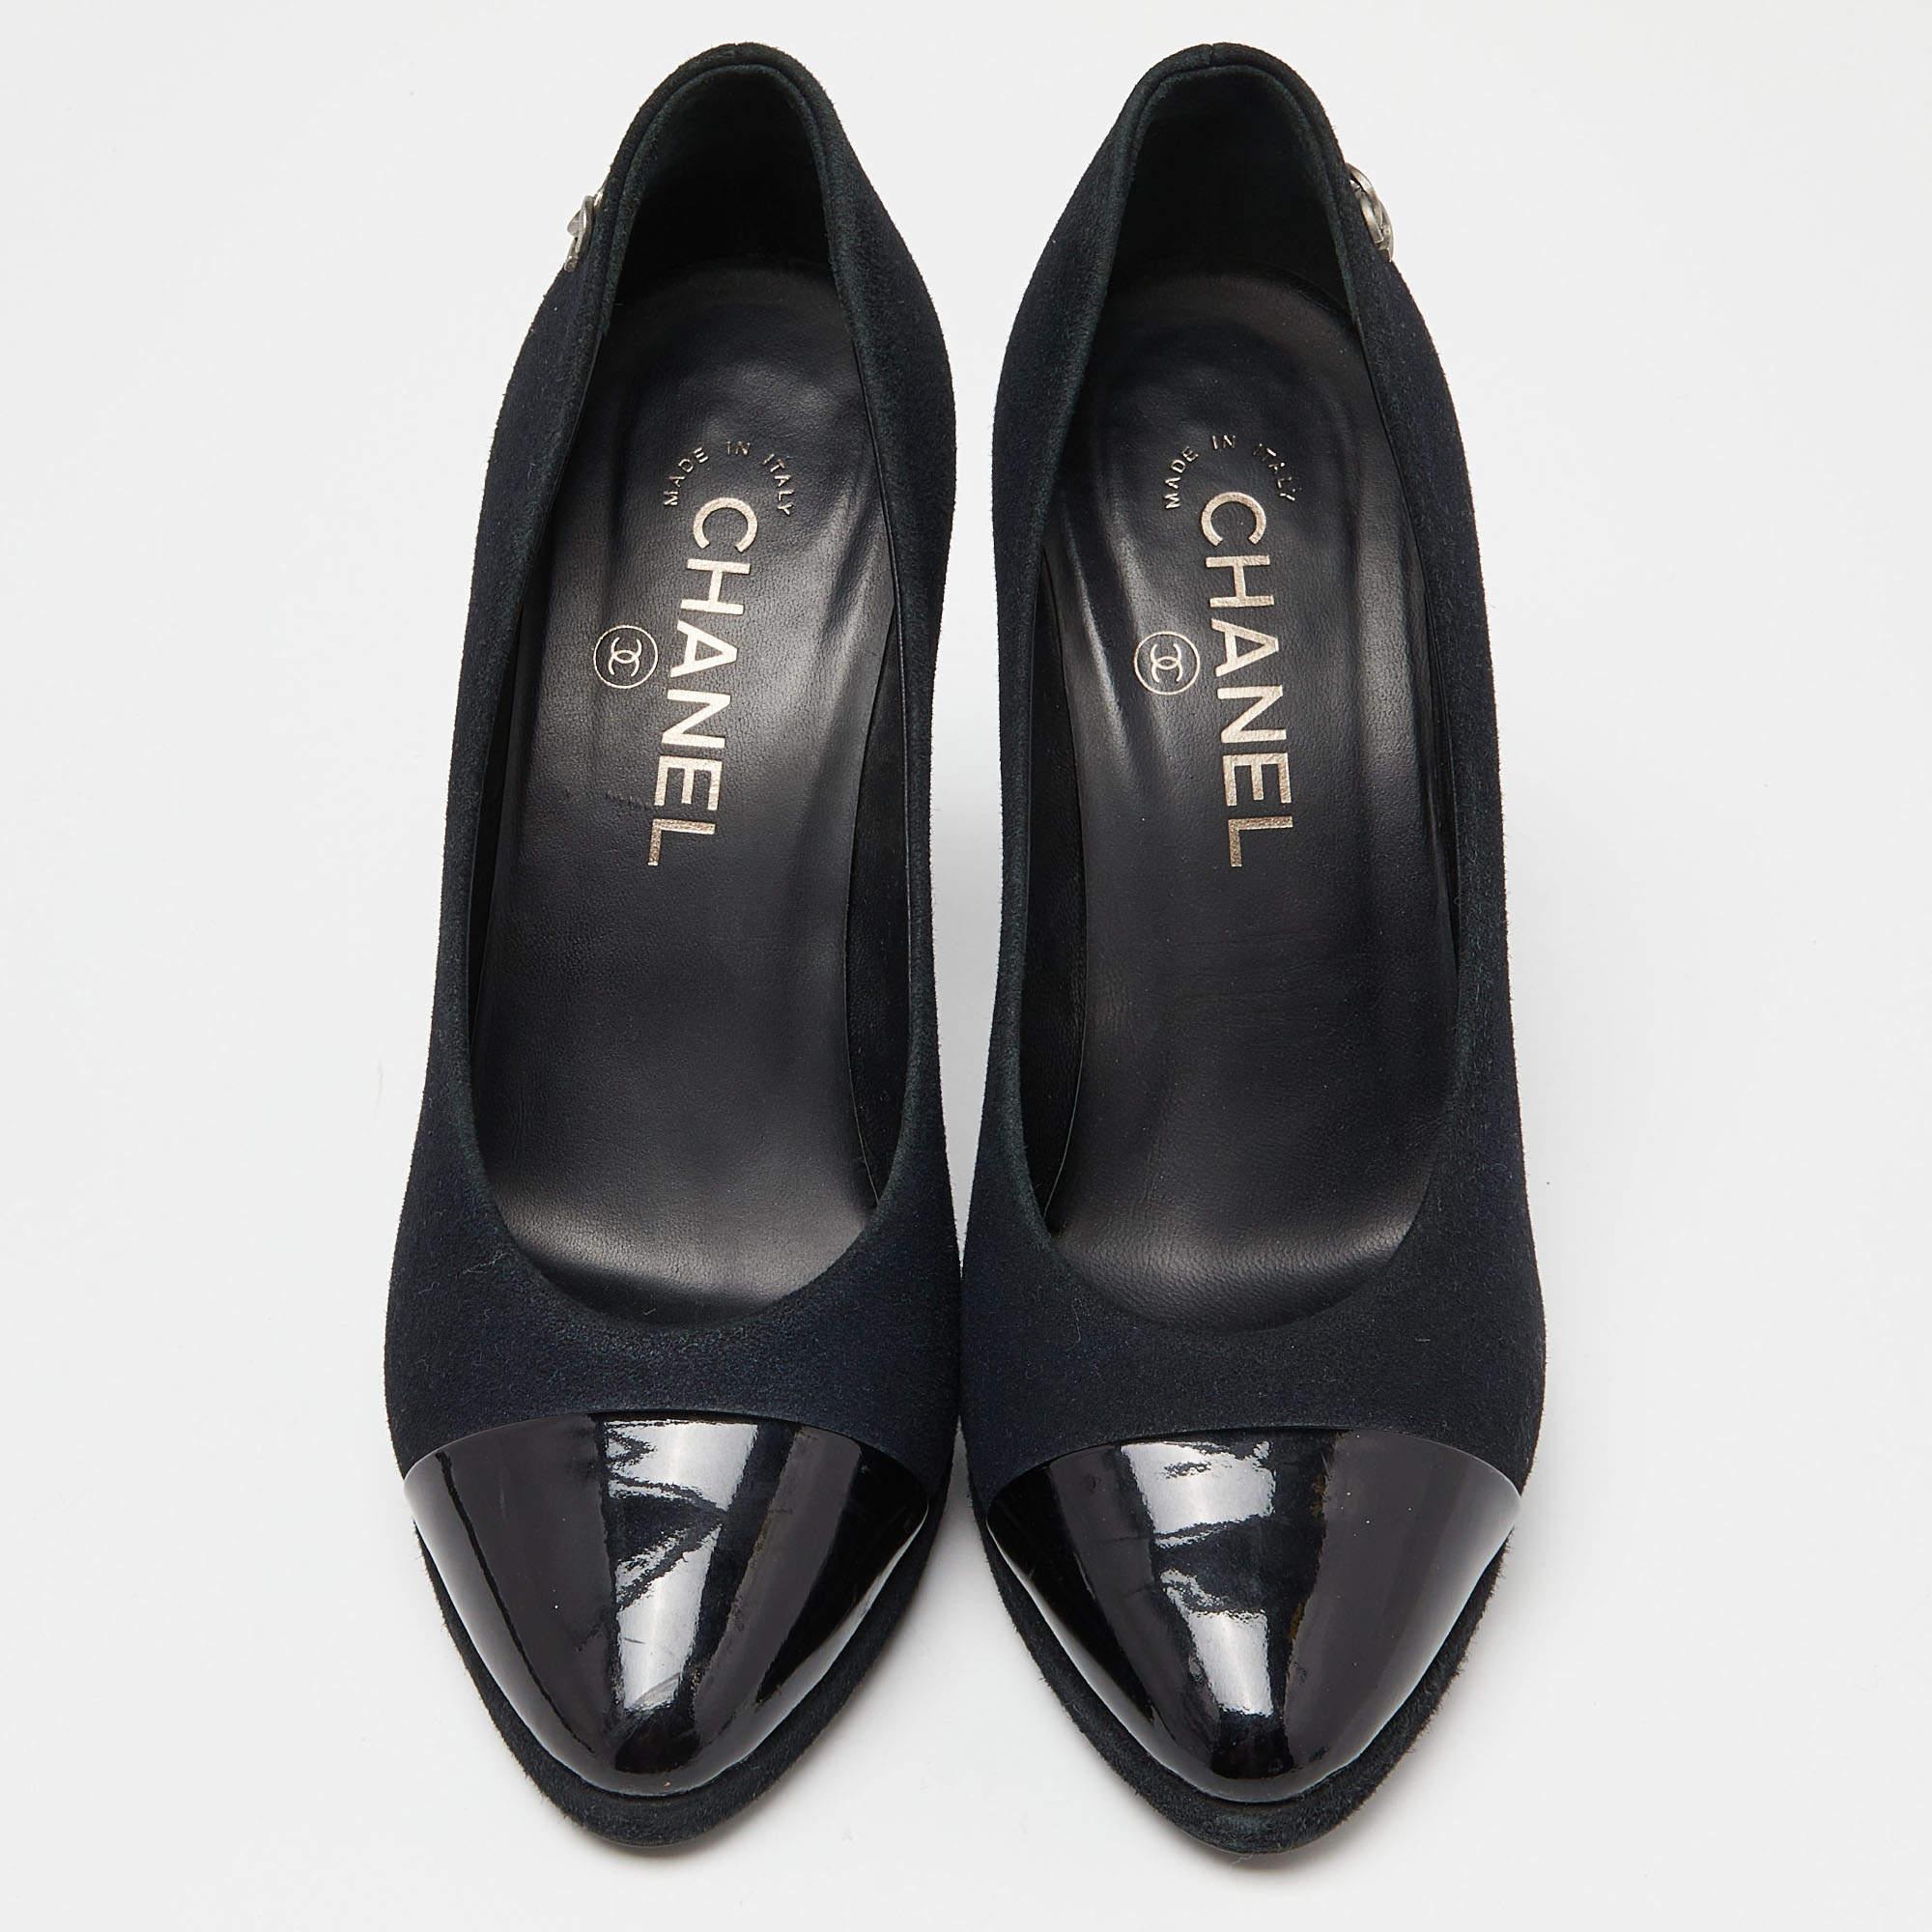 These pumps from Chanel are worth every shilling you spend and will make you stand out in the crowd. The black pumps are crafted from fabric along with patent leather and feature round patent leather cap toes. They flaunt comfortable leather-lined